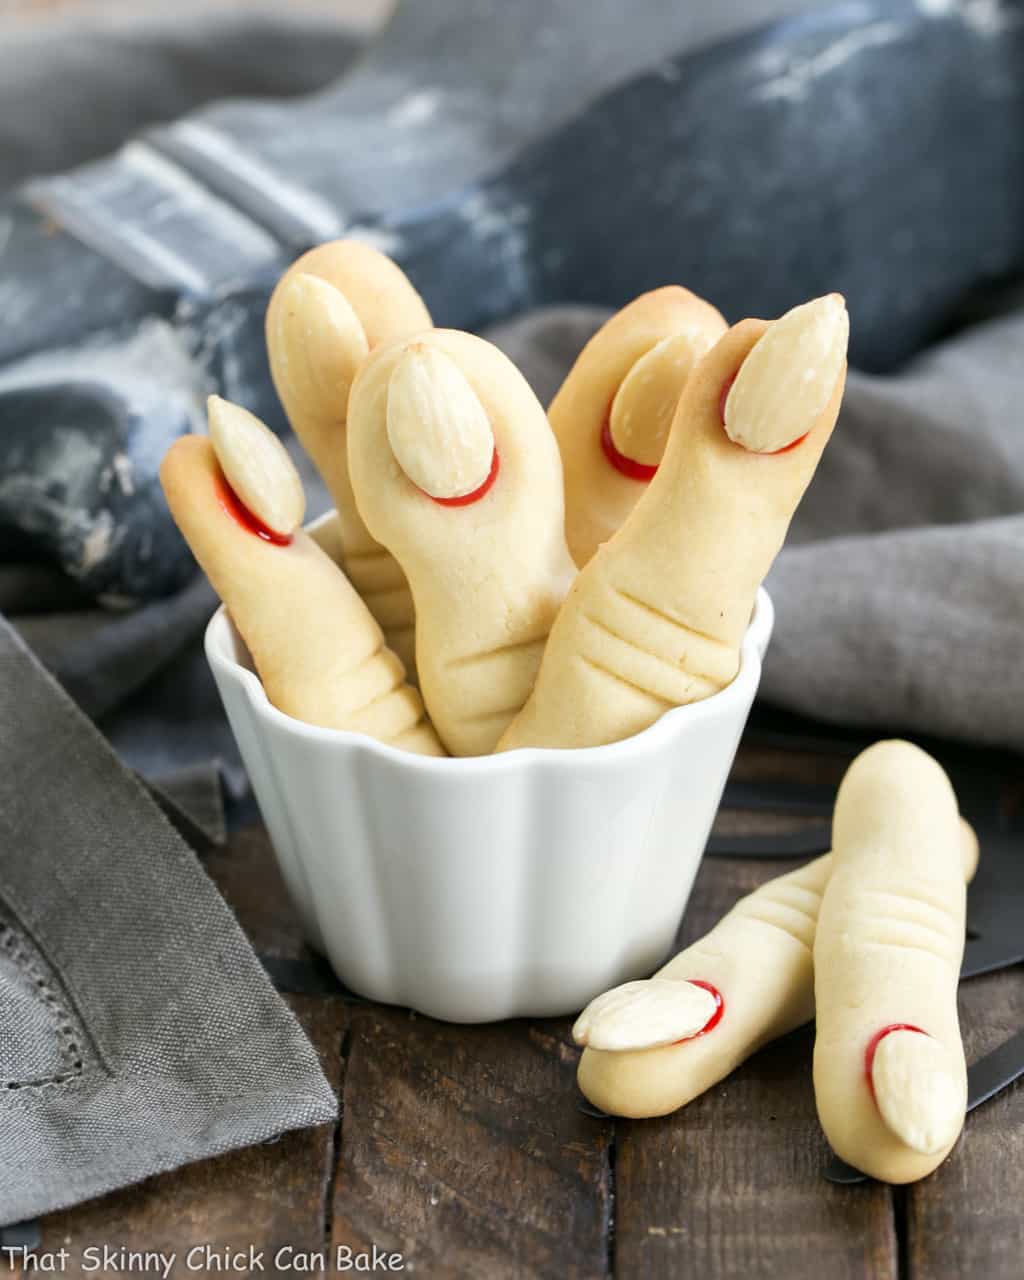 Witches Fingers Cookies standing upright in a white ramekin.